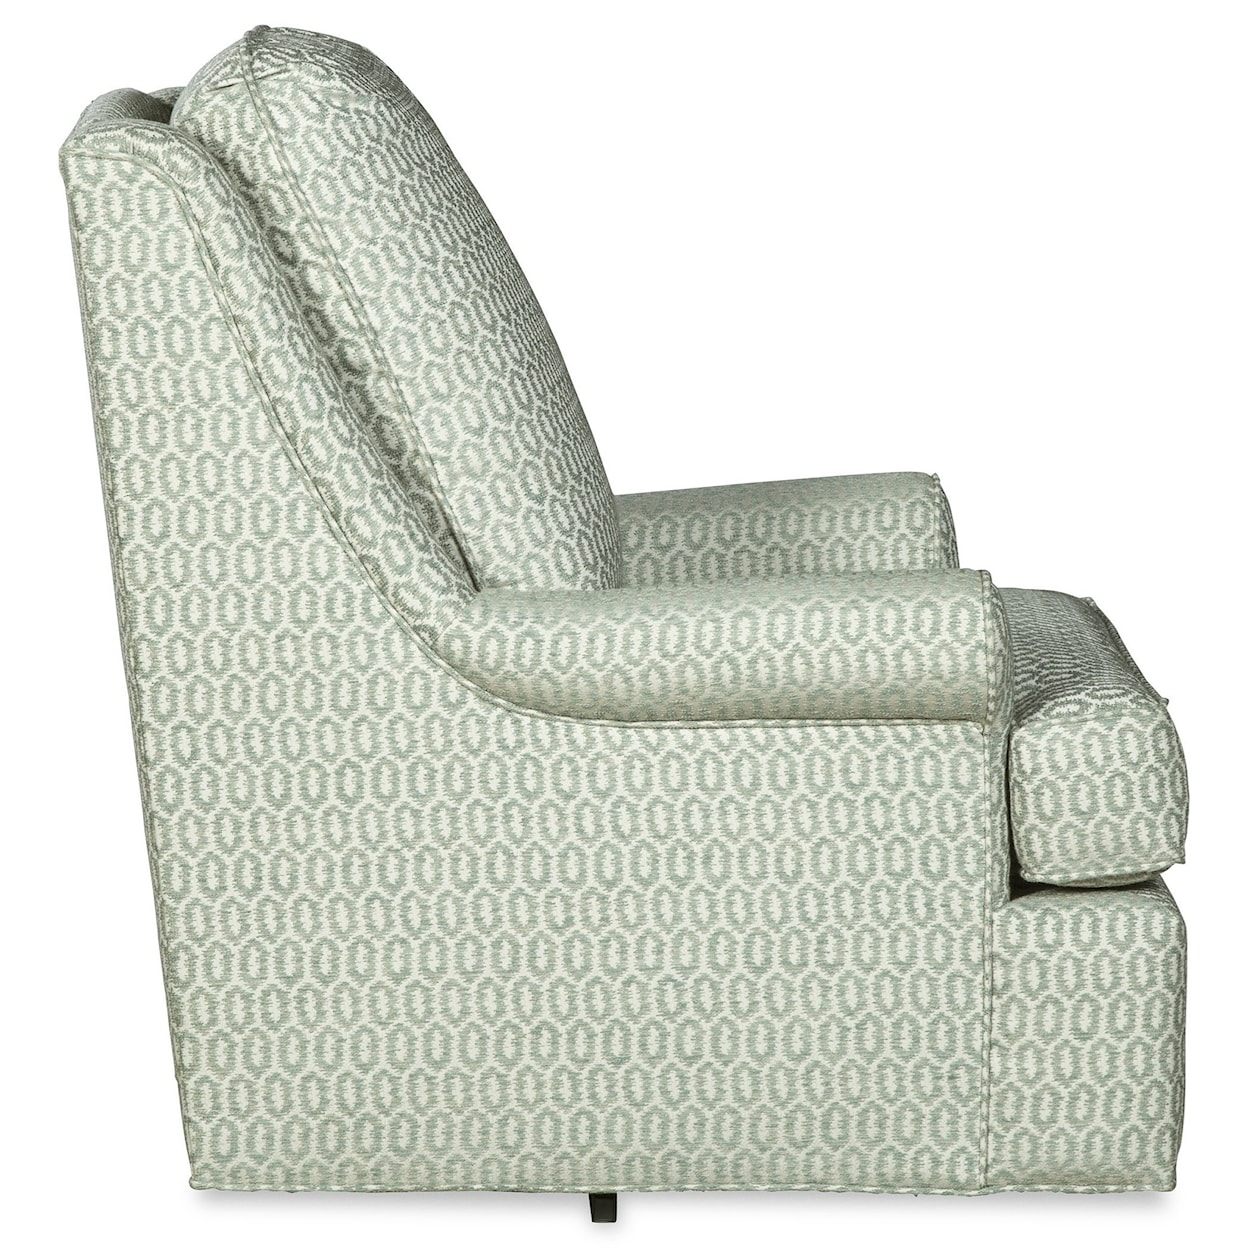 Hickory Craft Upholstered Chairs Swivel Glider Chair